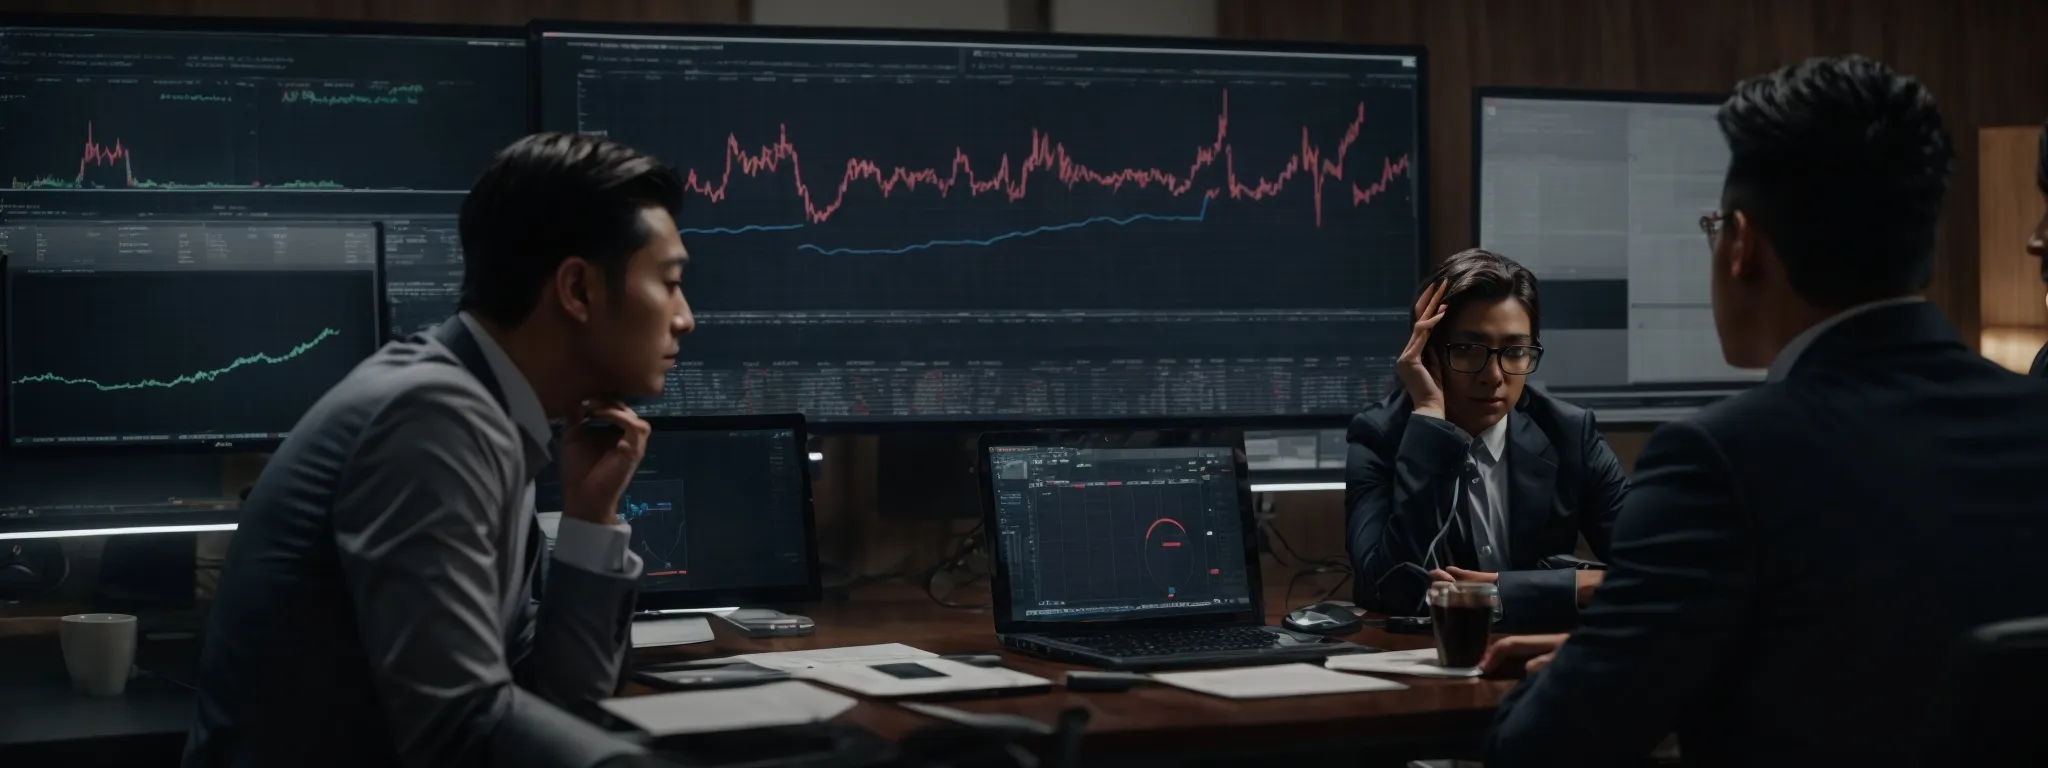 a team of marketers examines complex charts on a computer screen, strategizing their next move based on predictions made by their analytics software.